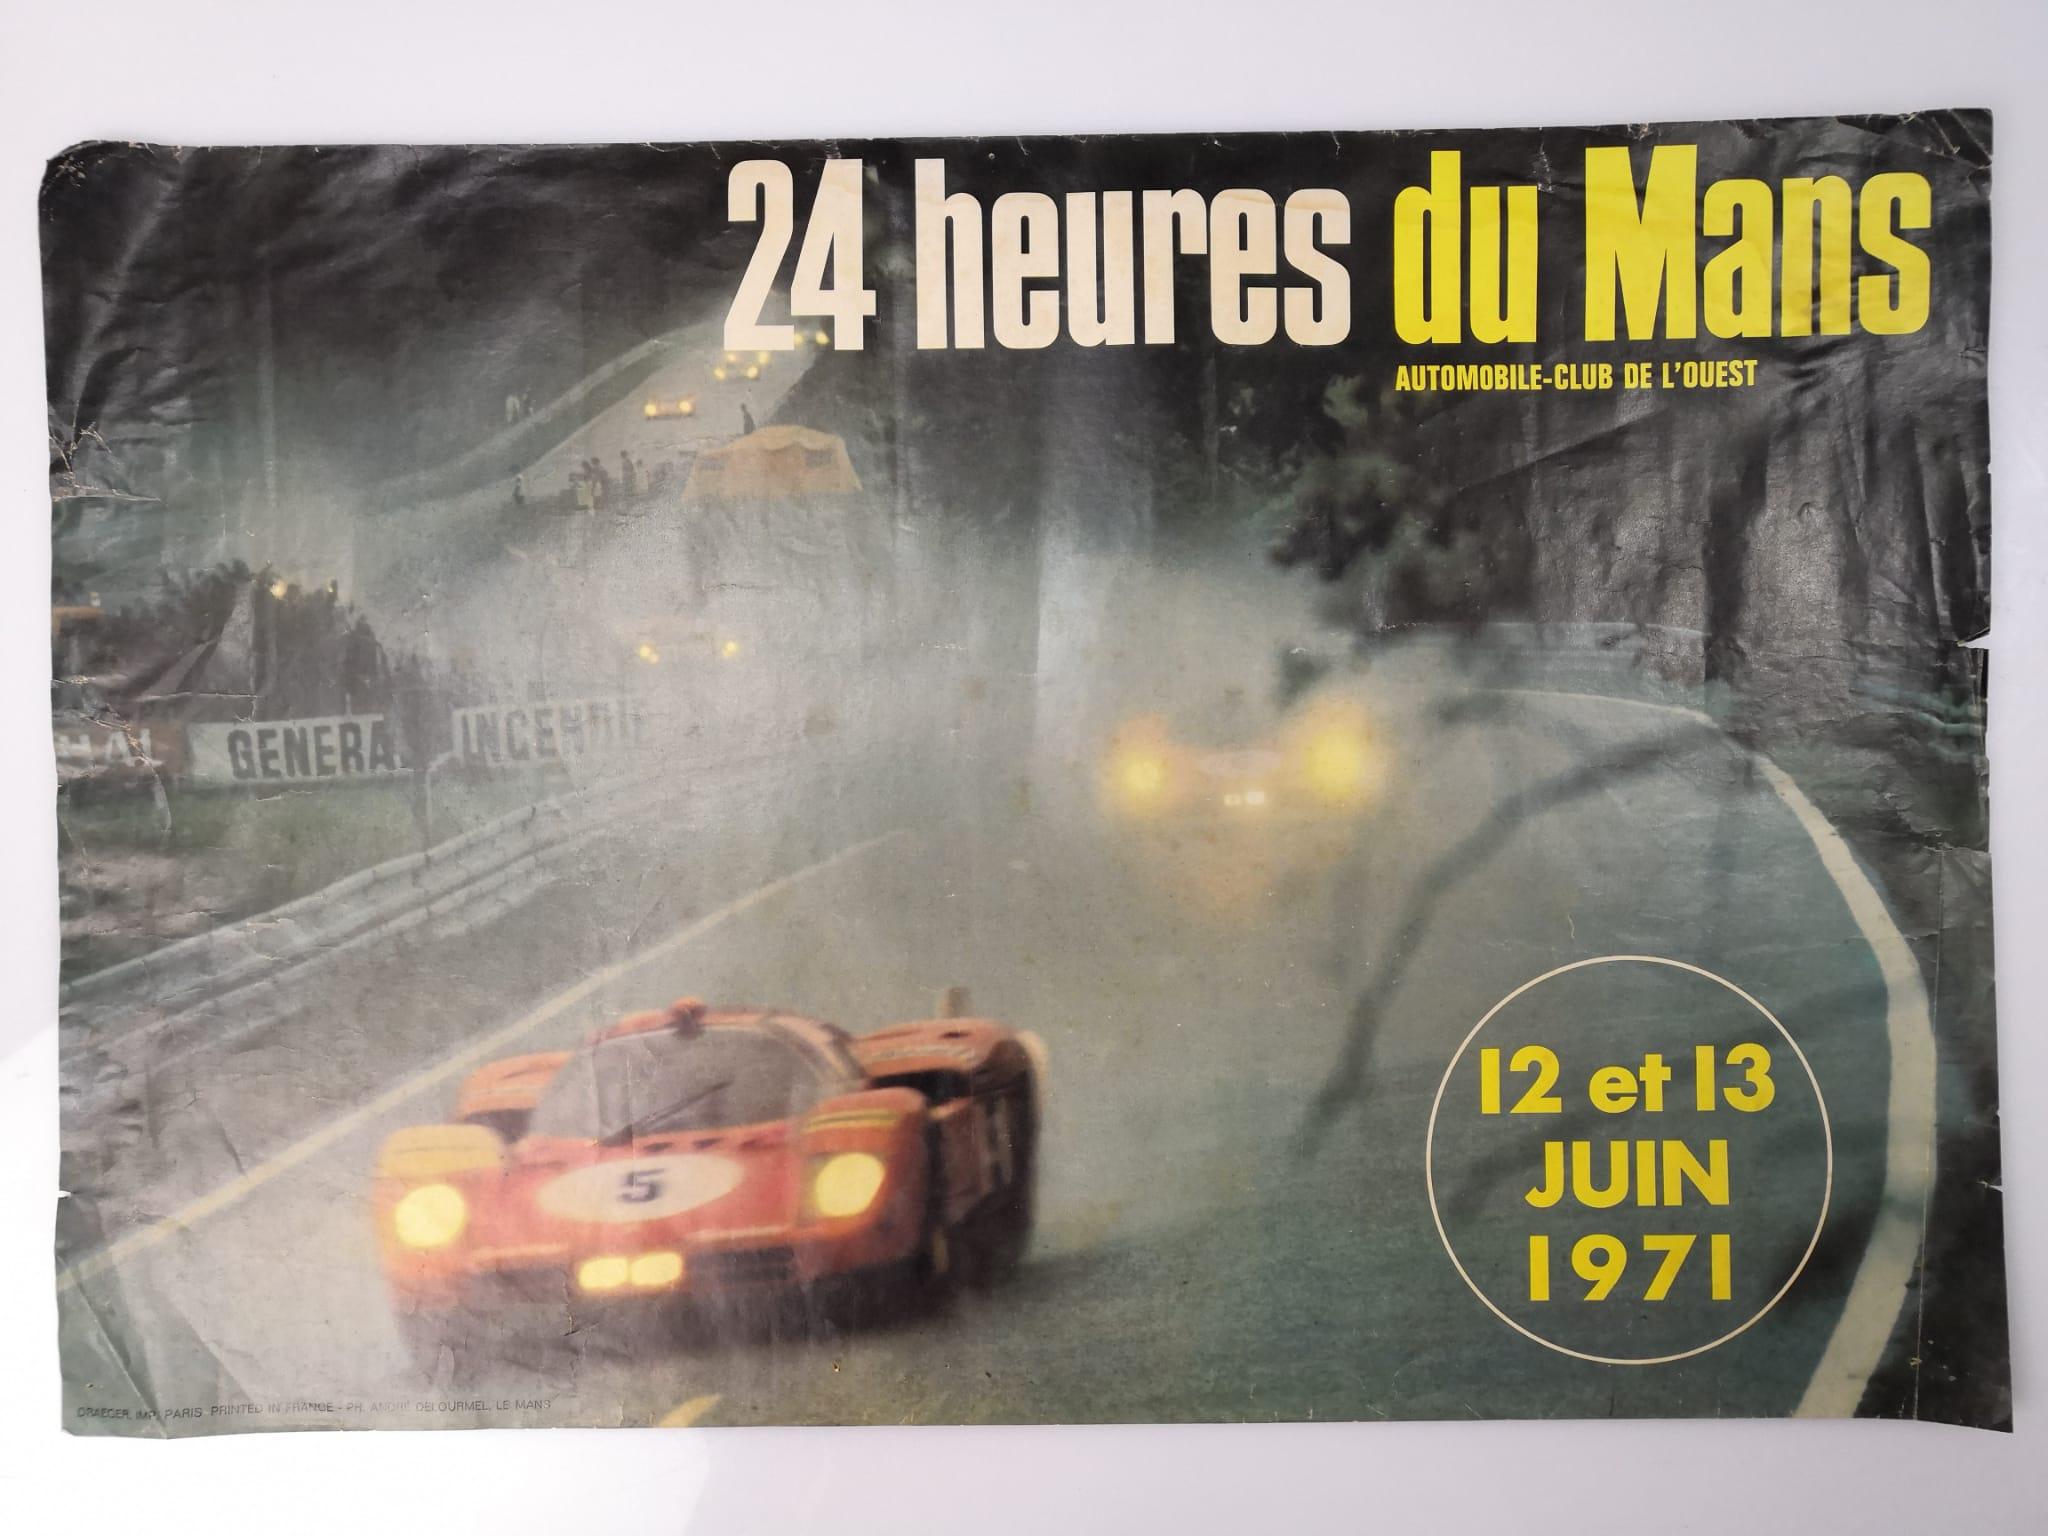 Fantastic original mid-century poster by photographer Andre Delourmel for the legendary 1971 24 Hours of Le Mans race, held on June 12-13. A real gem!